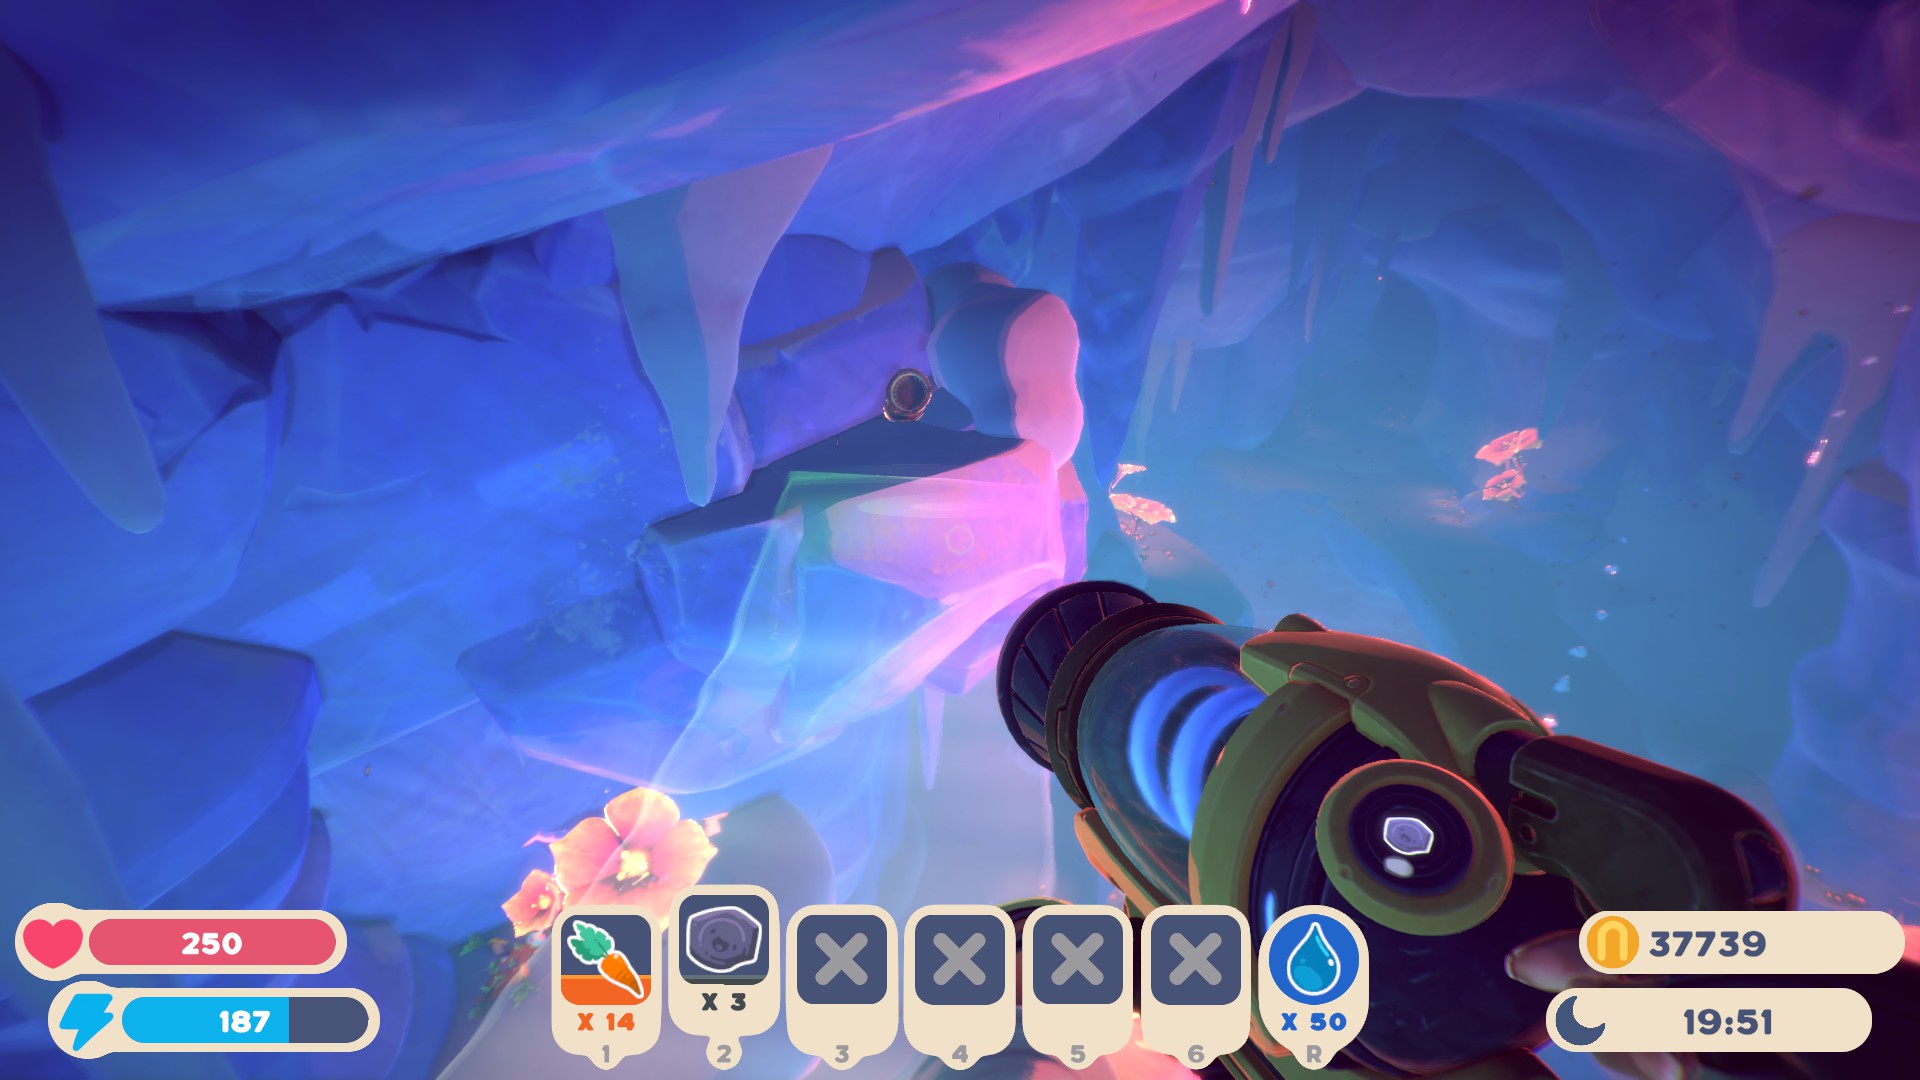 Slime Rancher 2 - Capsule Locations for Powderfall Bluffs - Pods 7 - 12 (Underground) - BE200B6